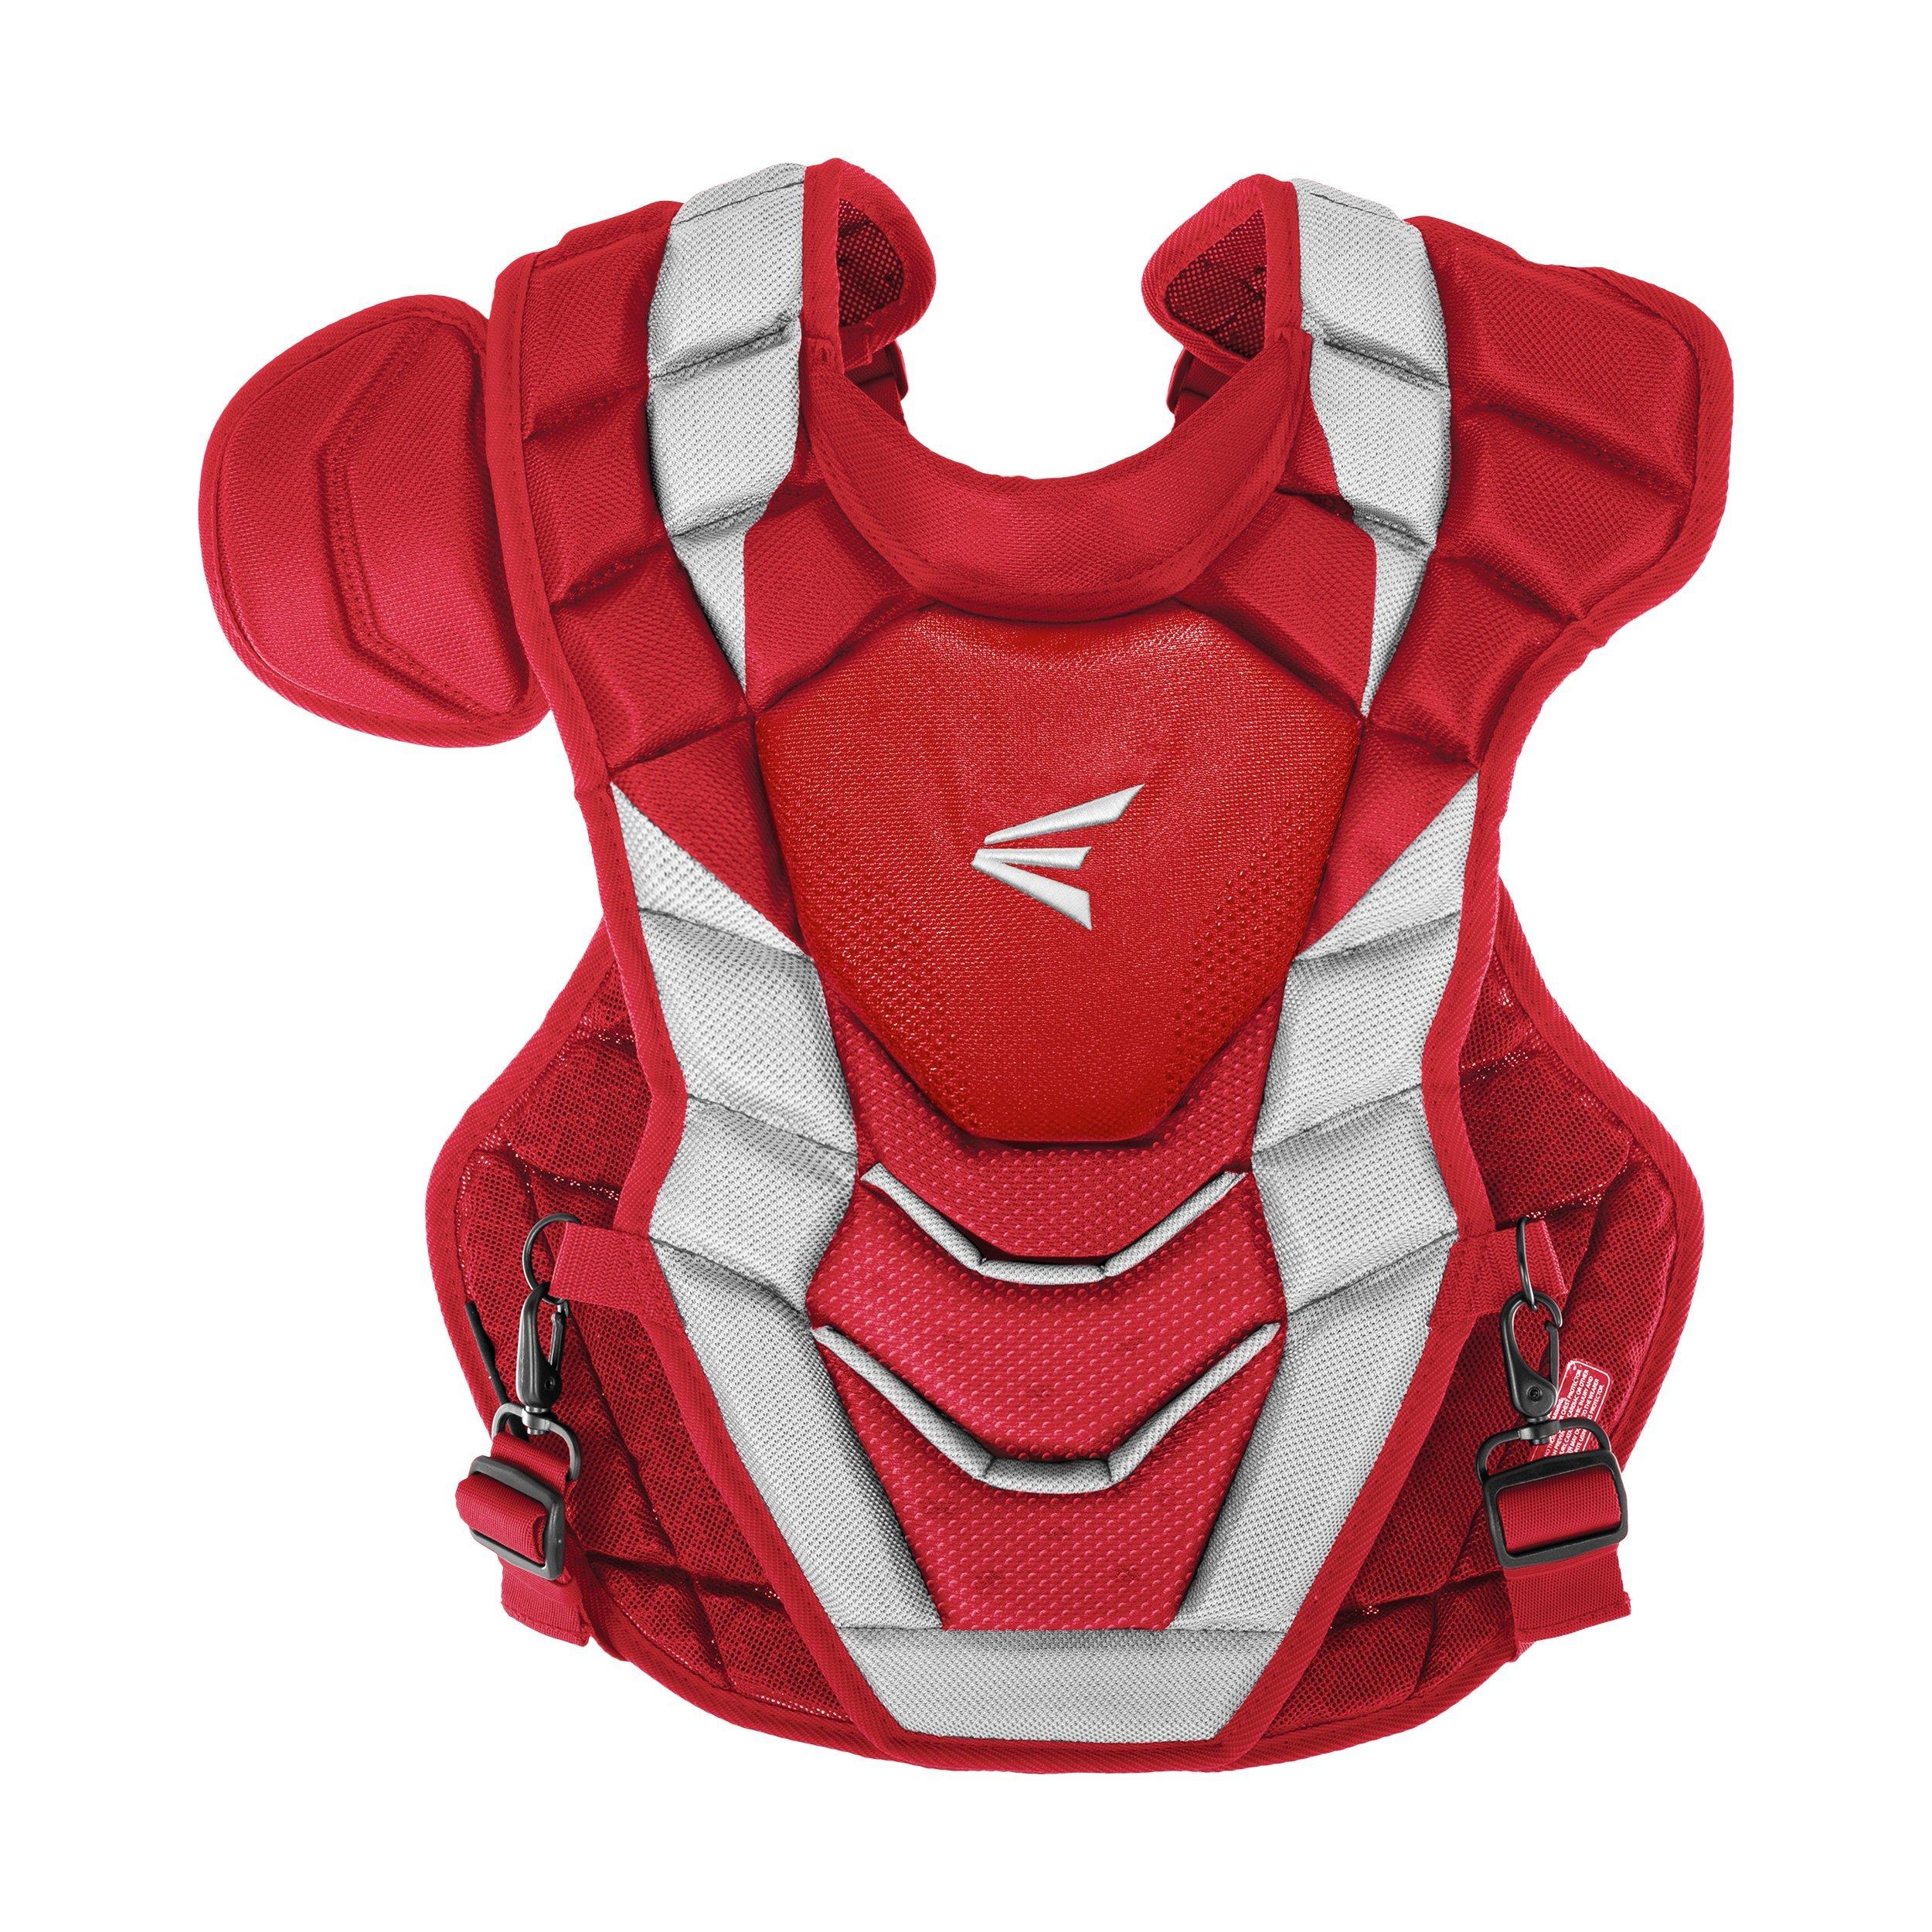 PRO X | CHEST PROTECTOR | Easton